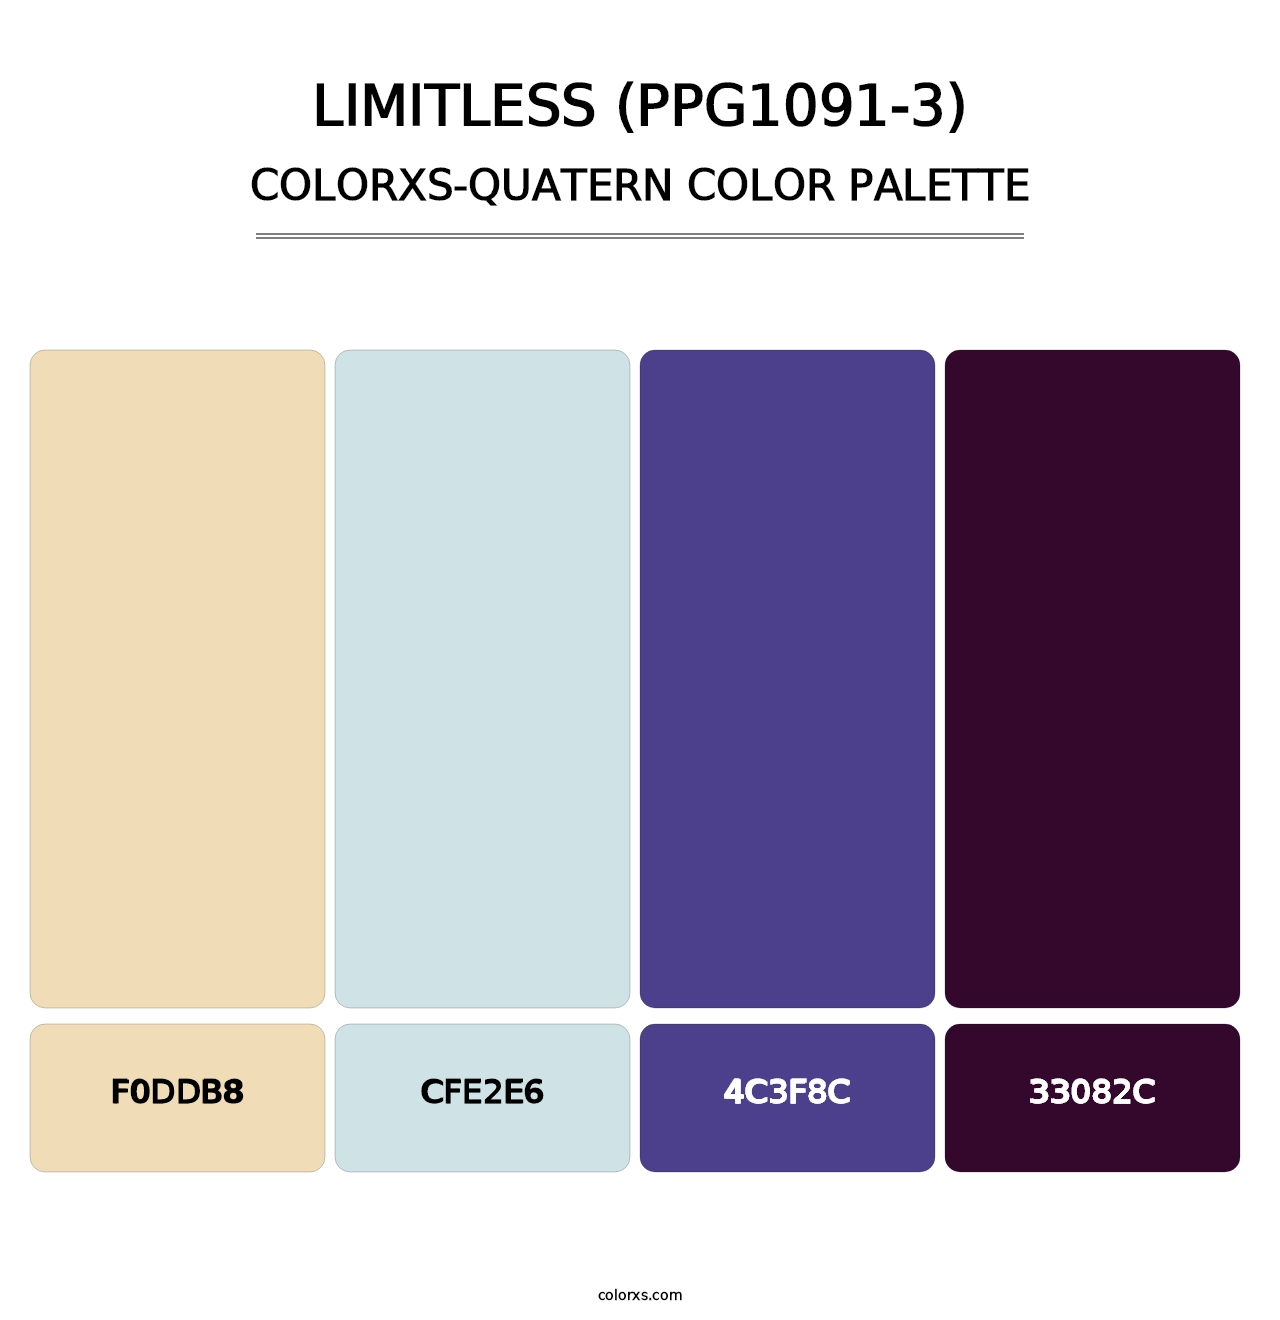 Limitless (PPG1091-3) - Colorxs Quatern Palette